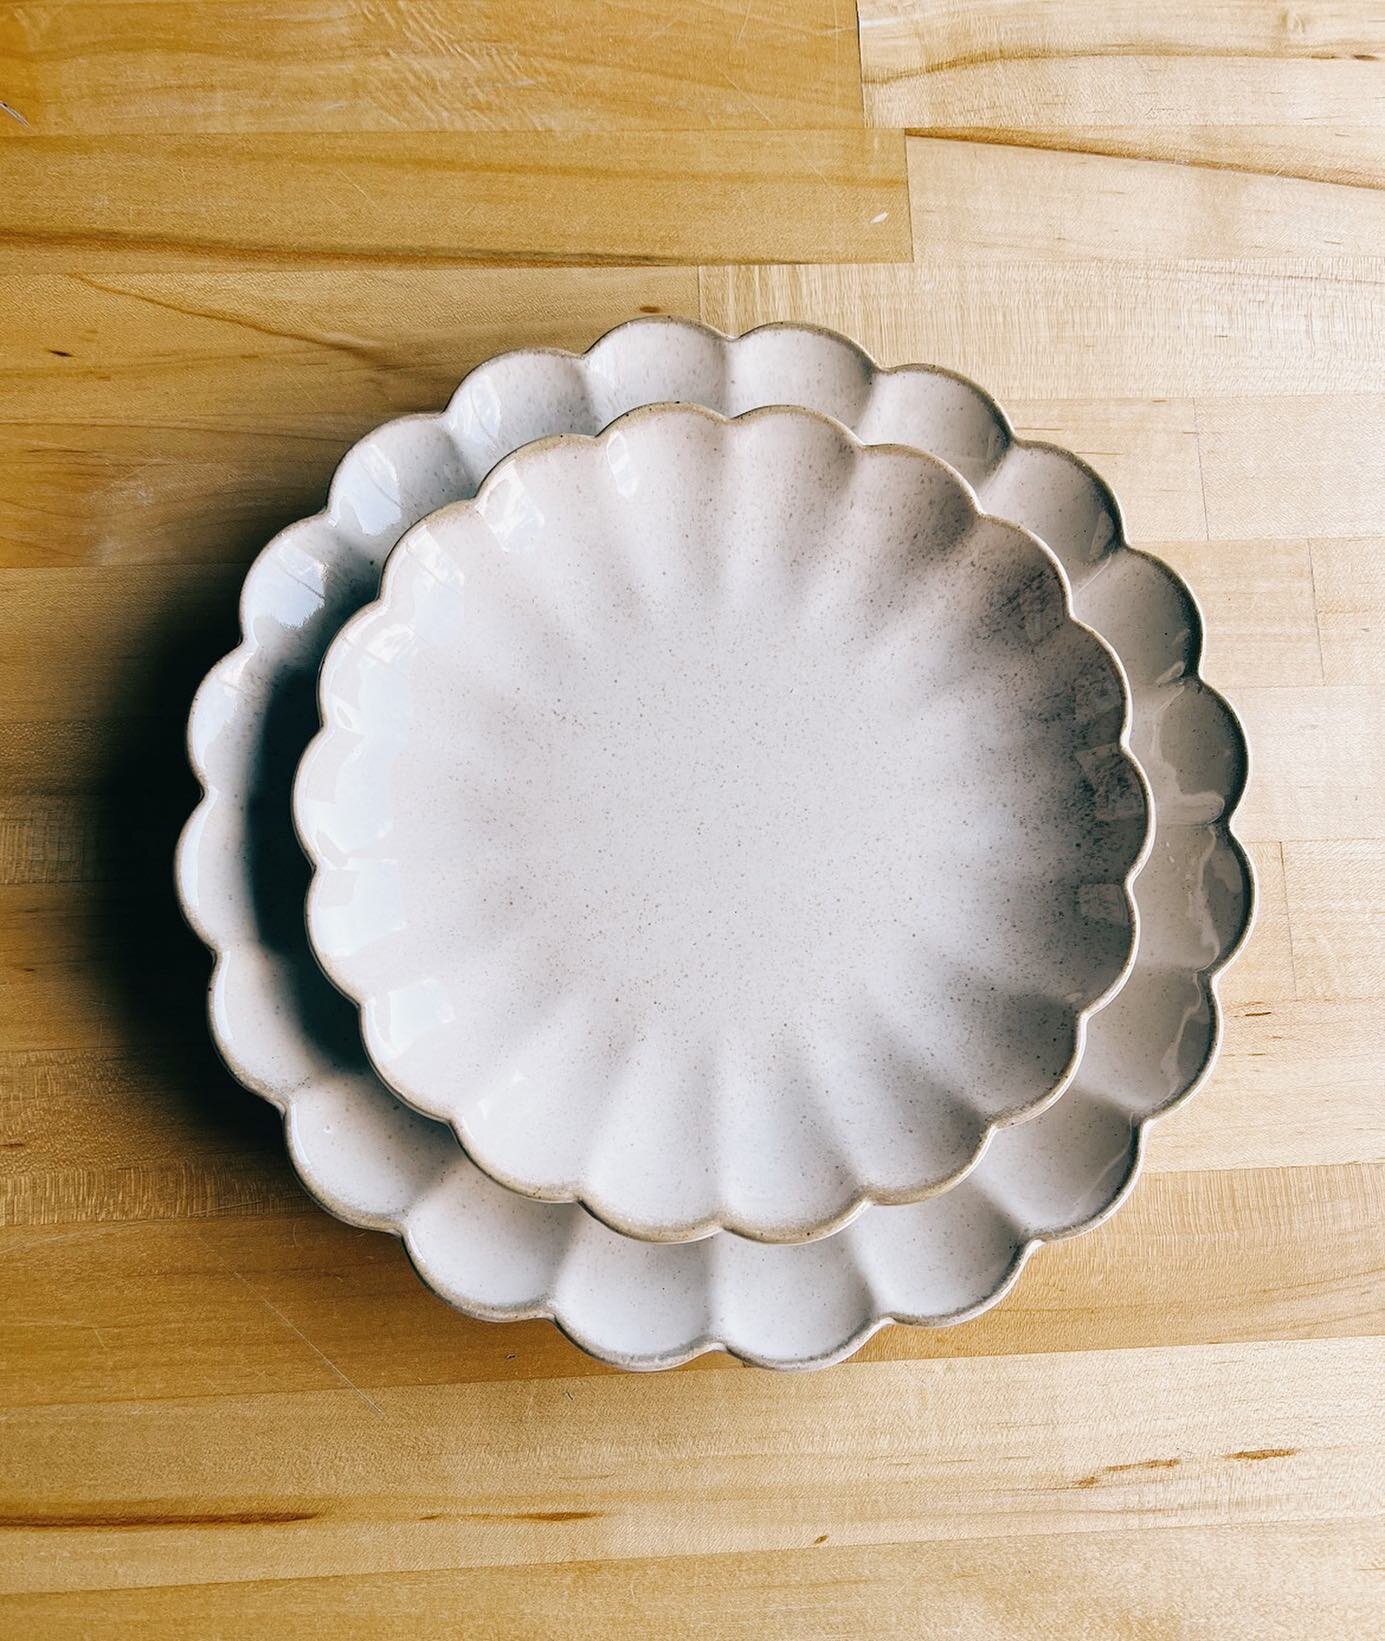 New scalloped edge plates remind us of clamshells. That perfect ivory tone with a speckle. 👌🏻